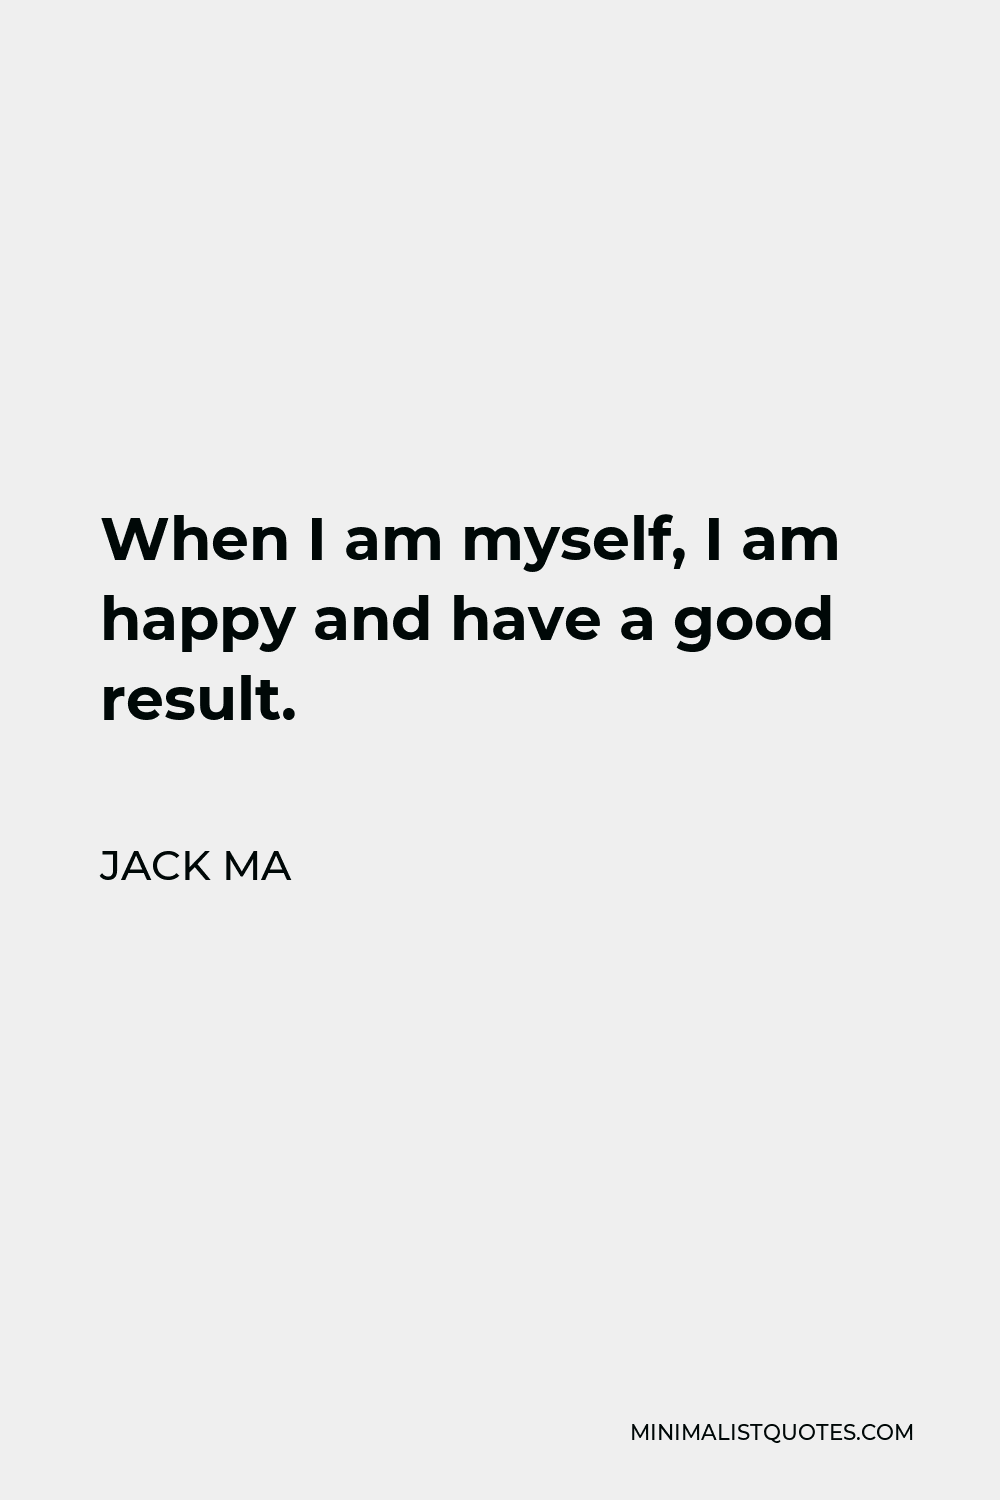 Jack Ma Quote - When I am myself, I am happy and have a good result.